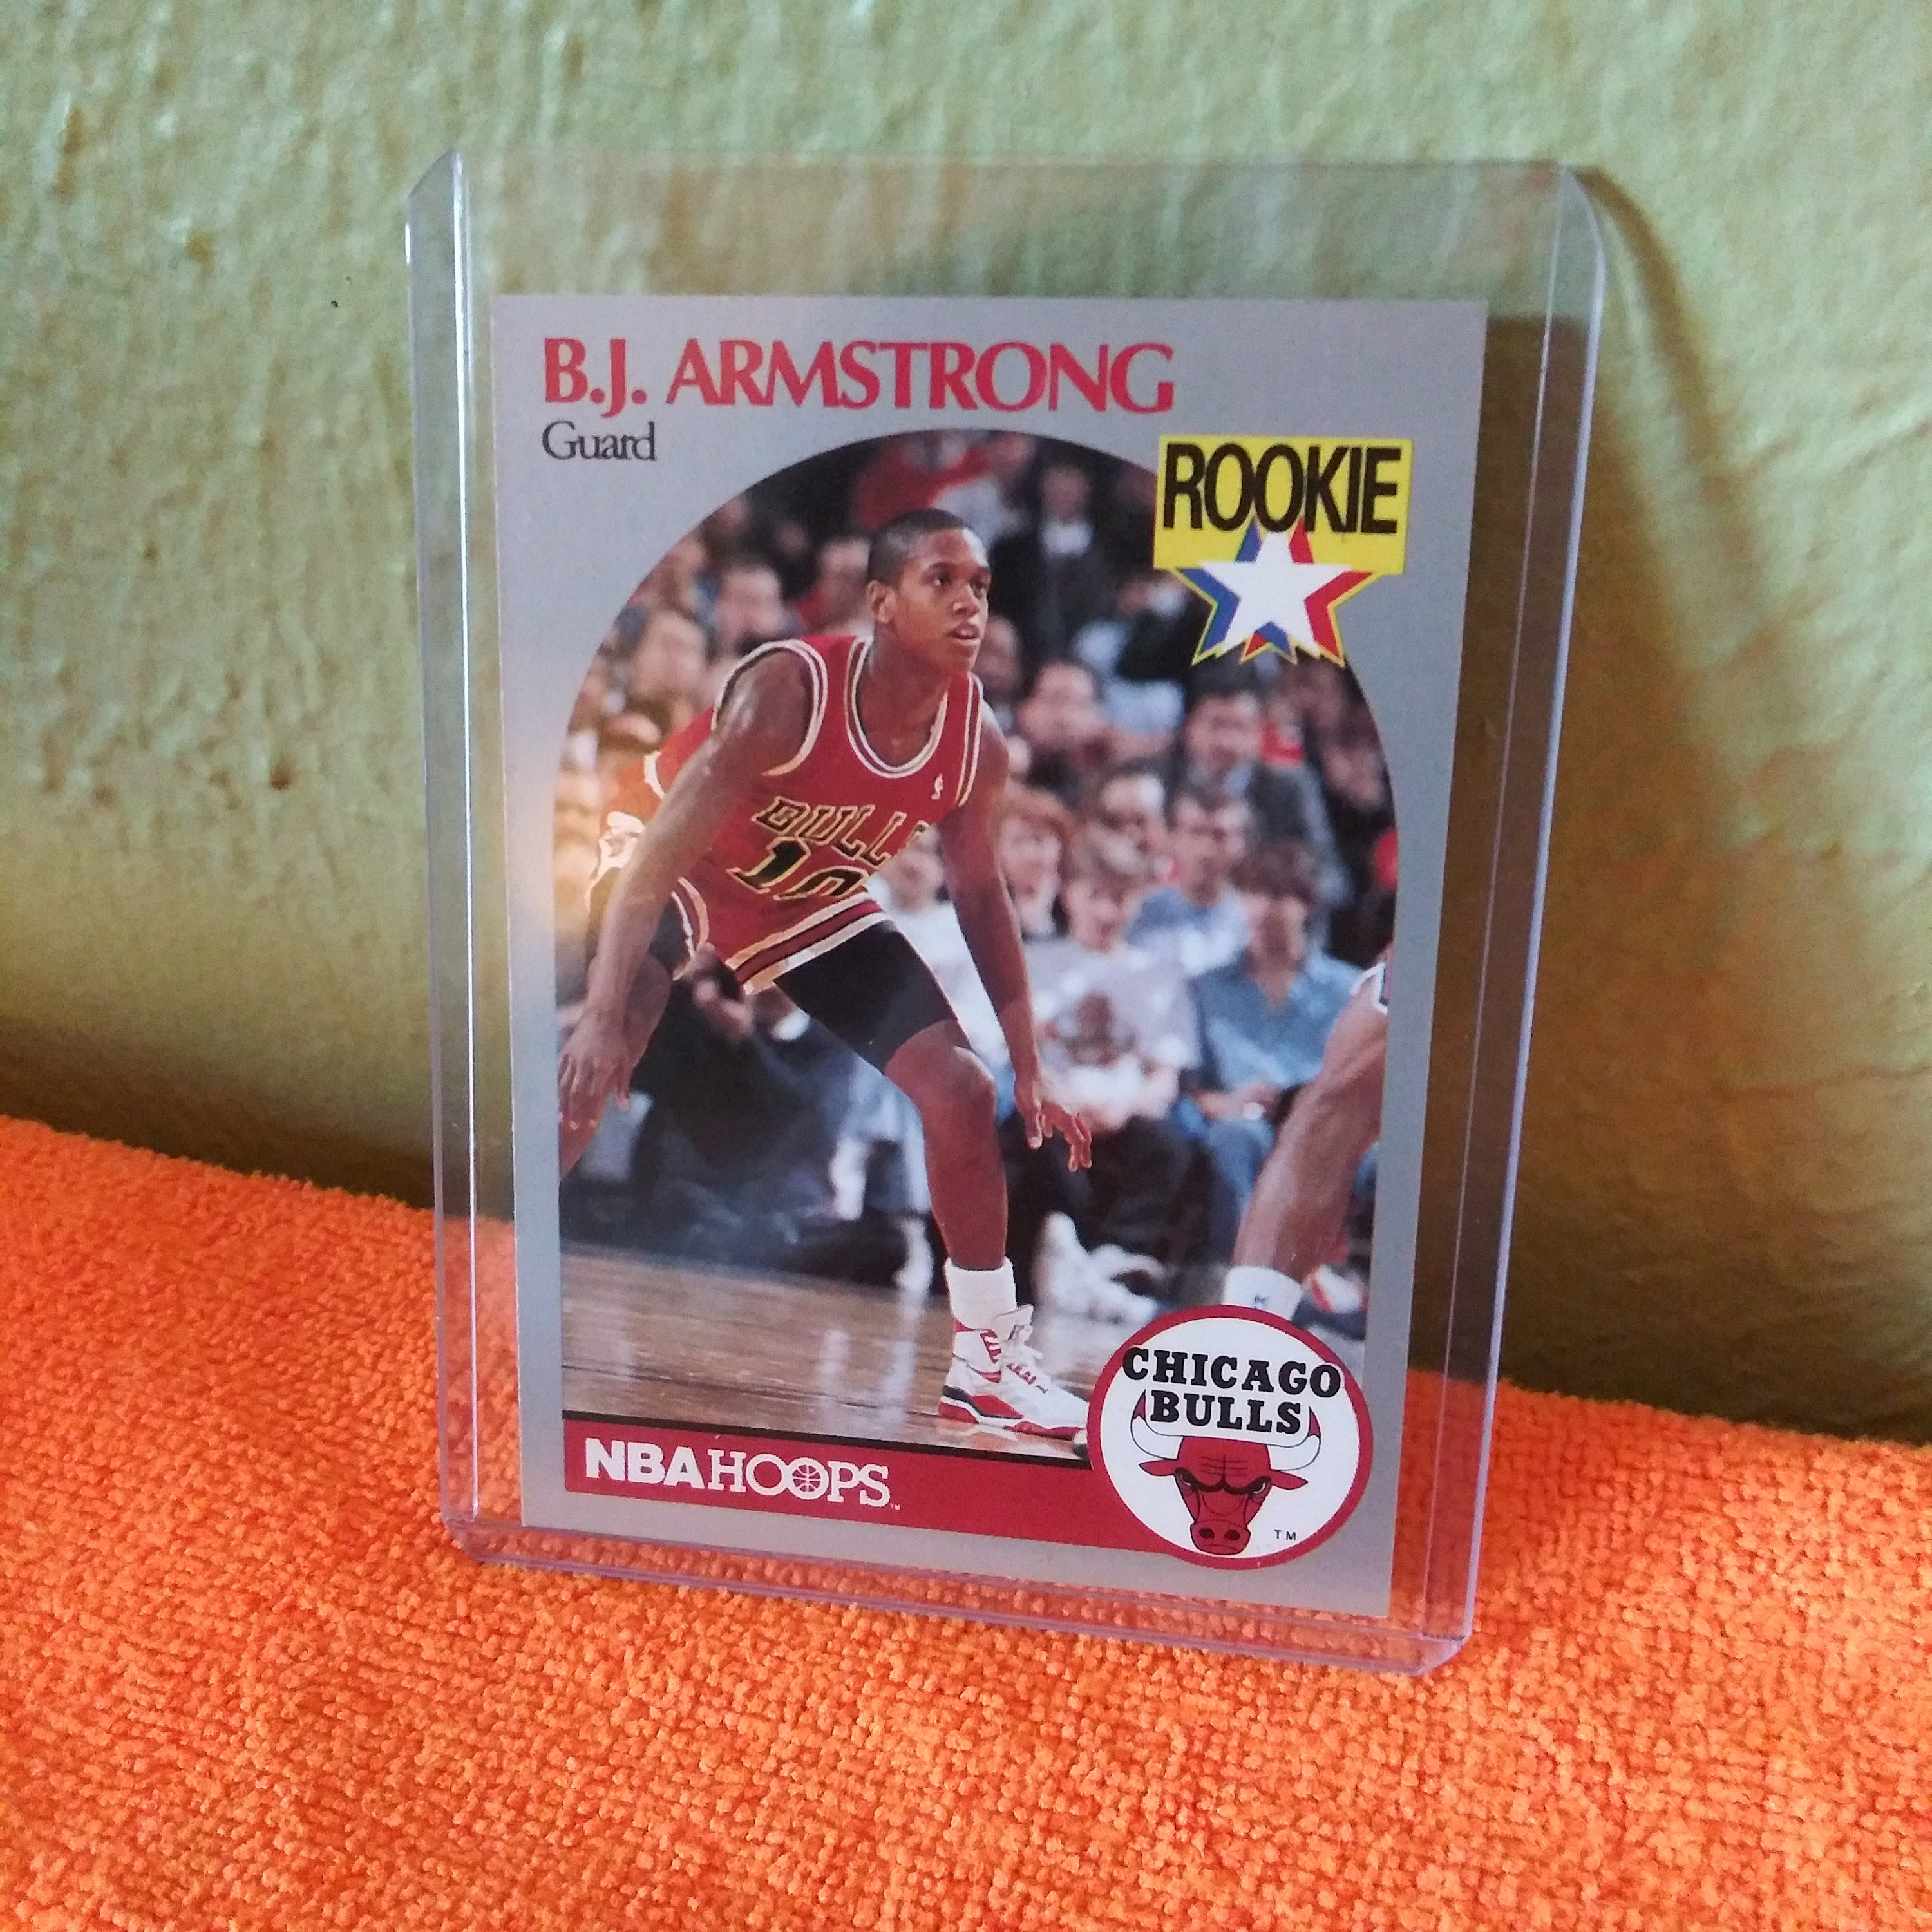 Rare 1990 B.J. Armstrong Rookie NBA Hoops Collector Card 60 | Etsy